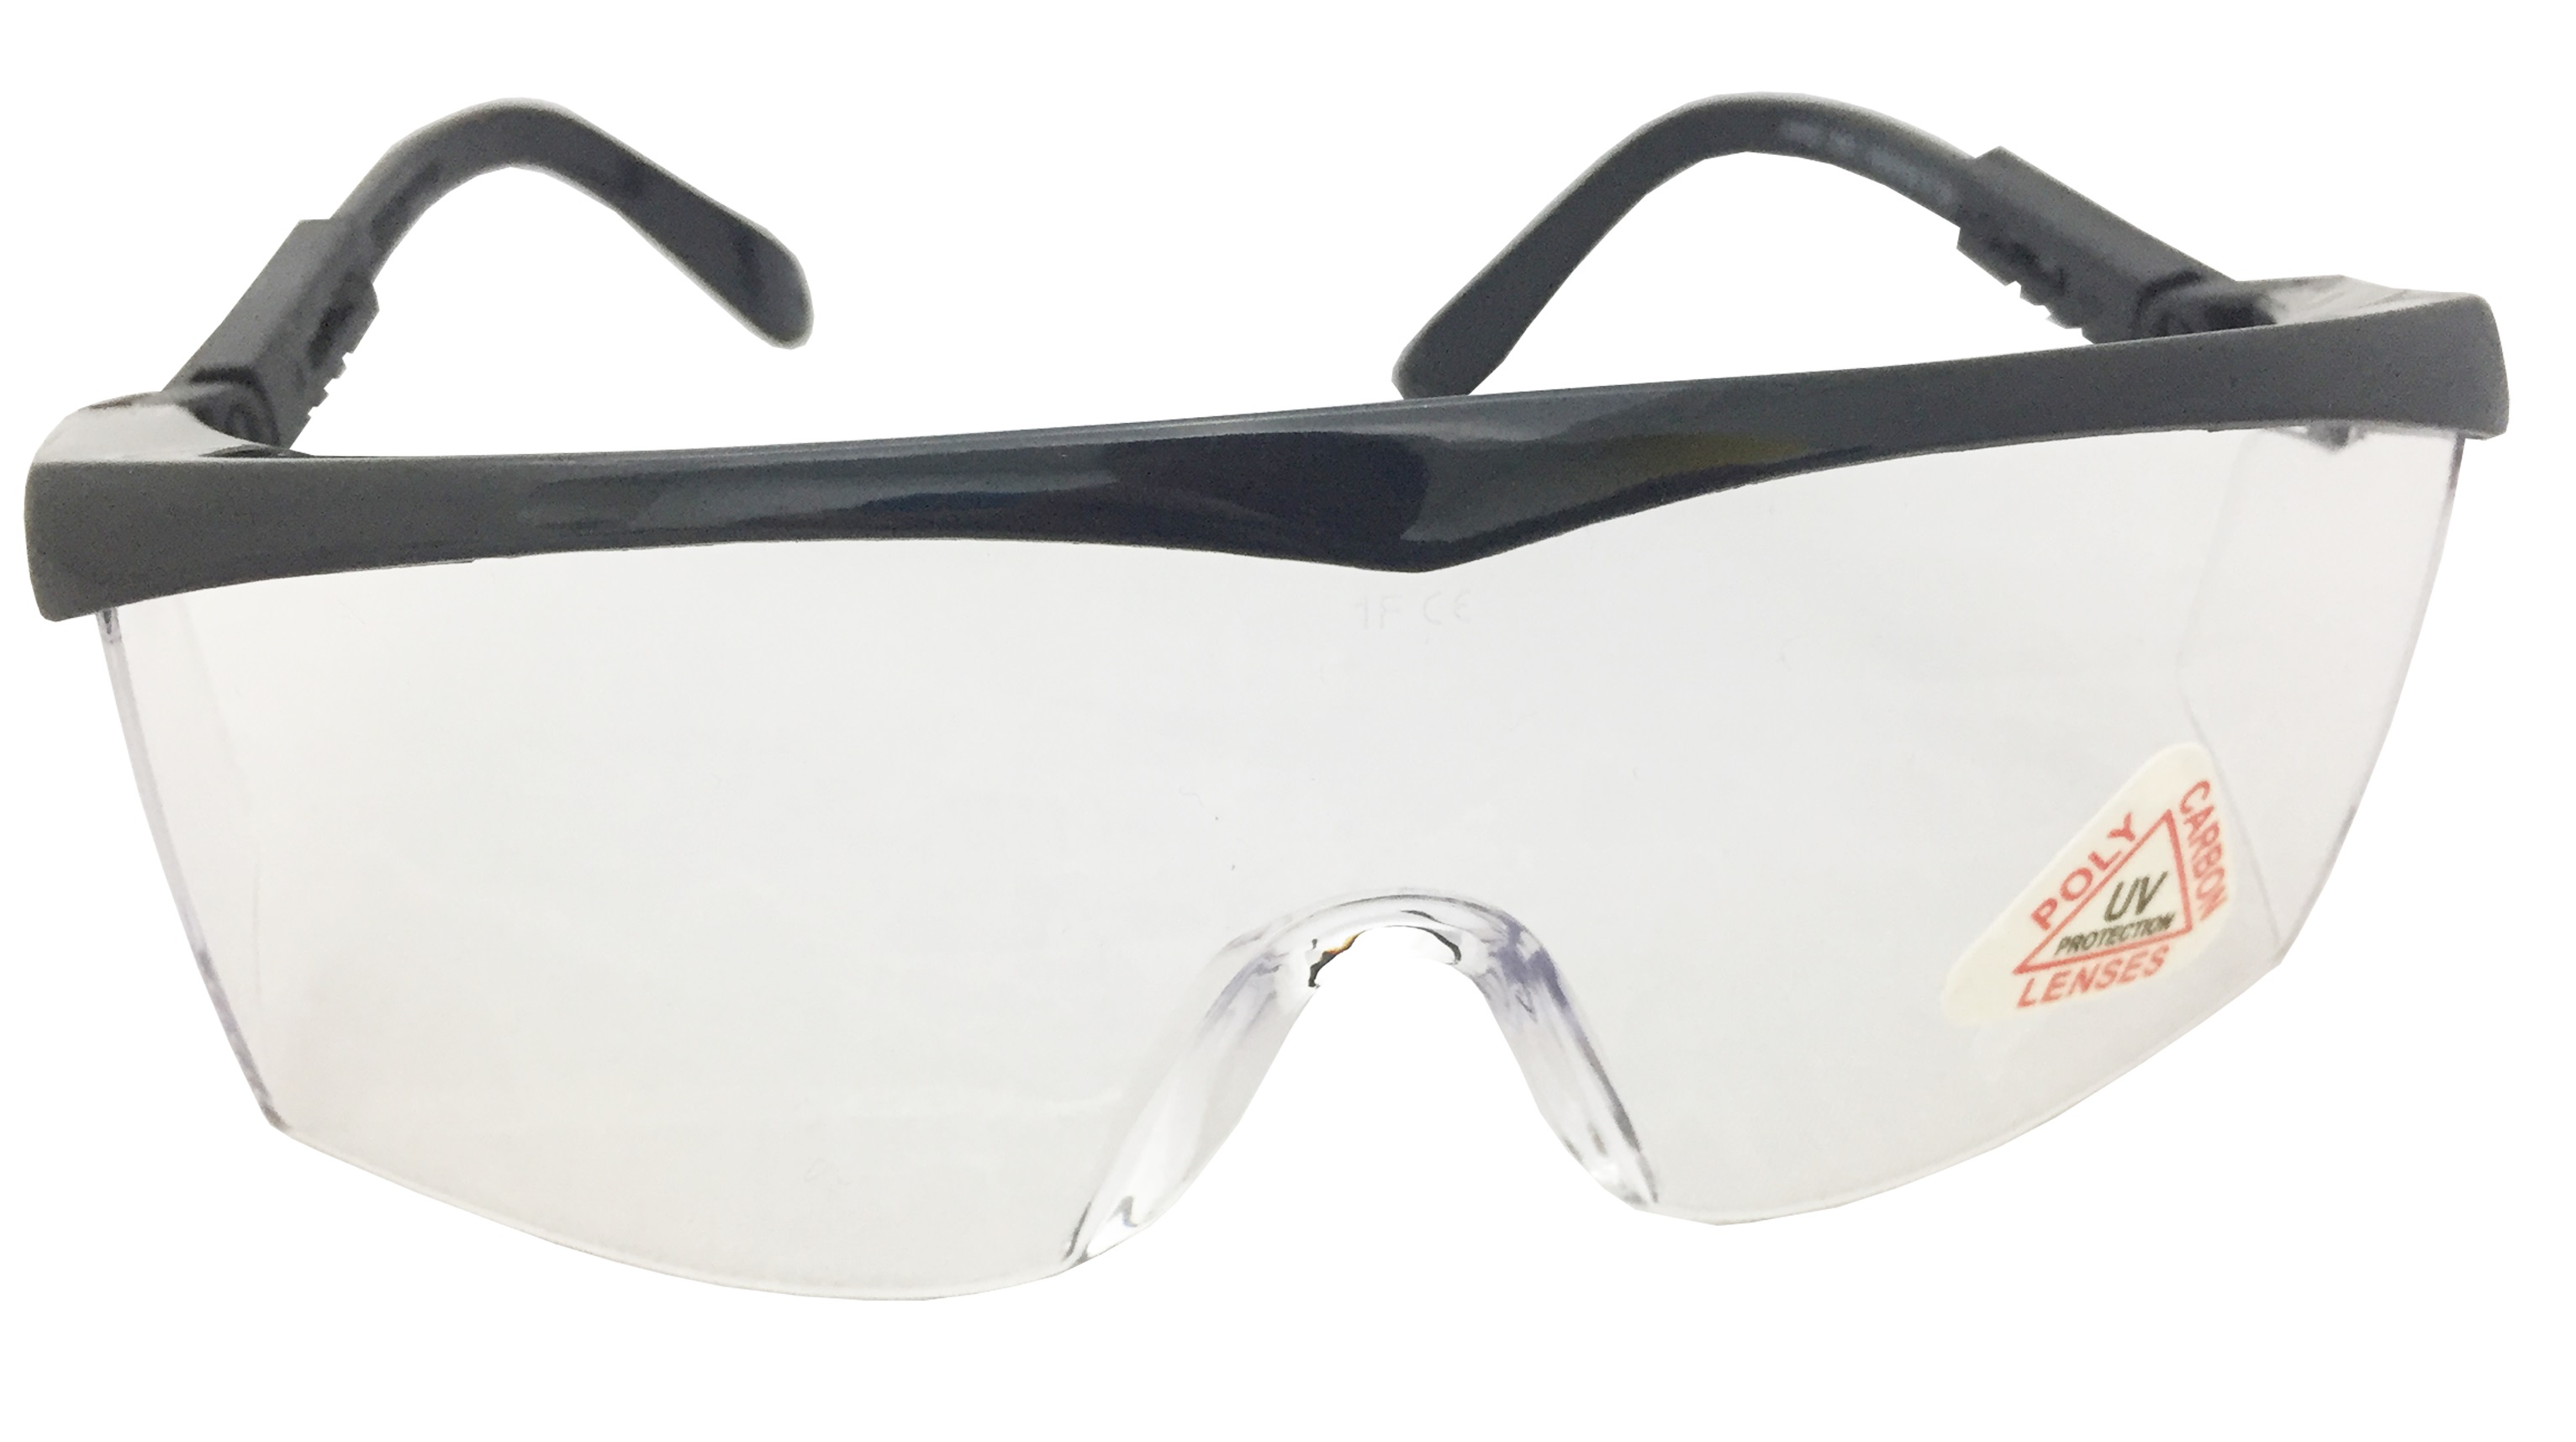 TF007 Black Frame Safety Spectacles